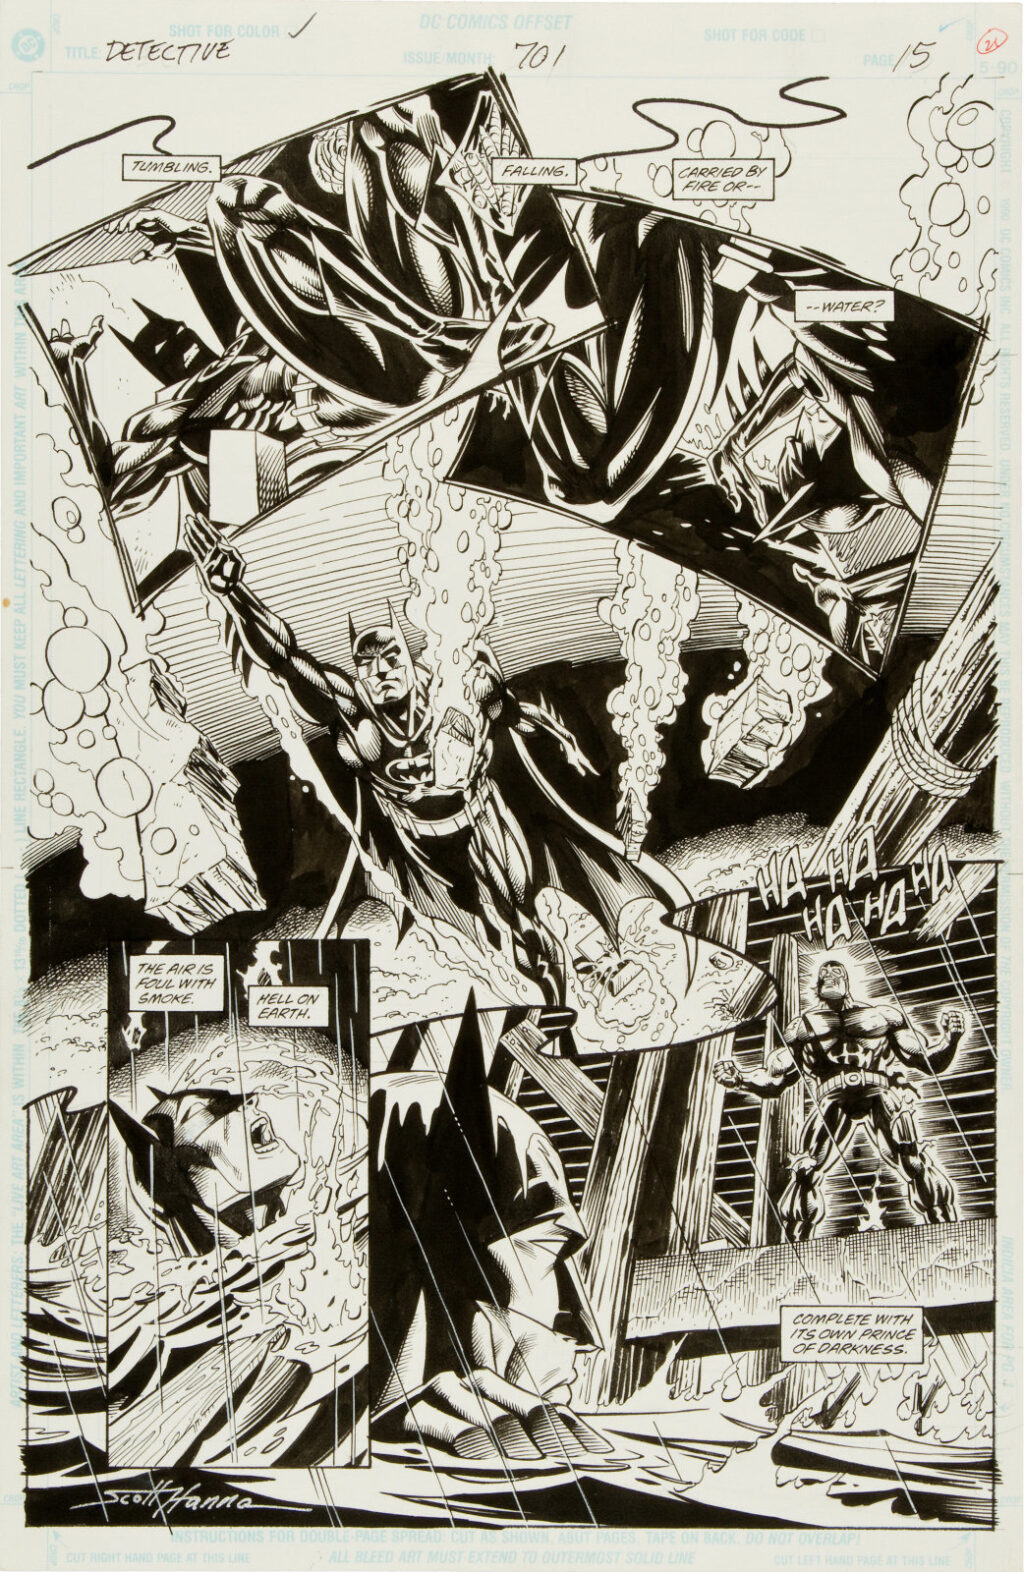 Detective Comics issue 701 page 15 by Graham Nolan and Scott Hanna